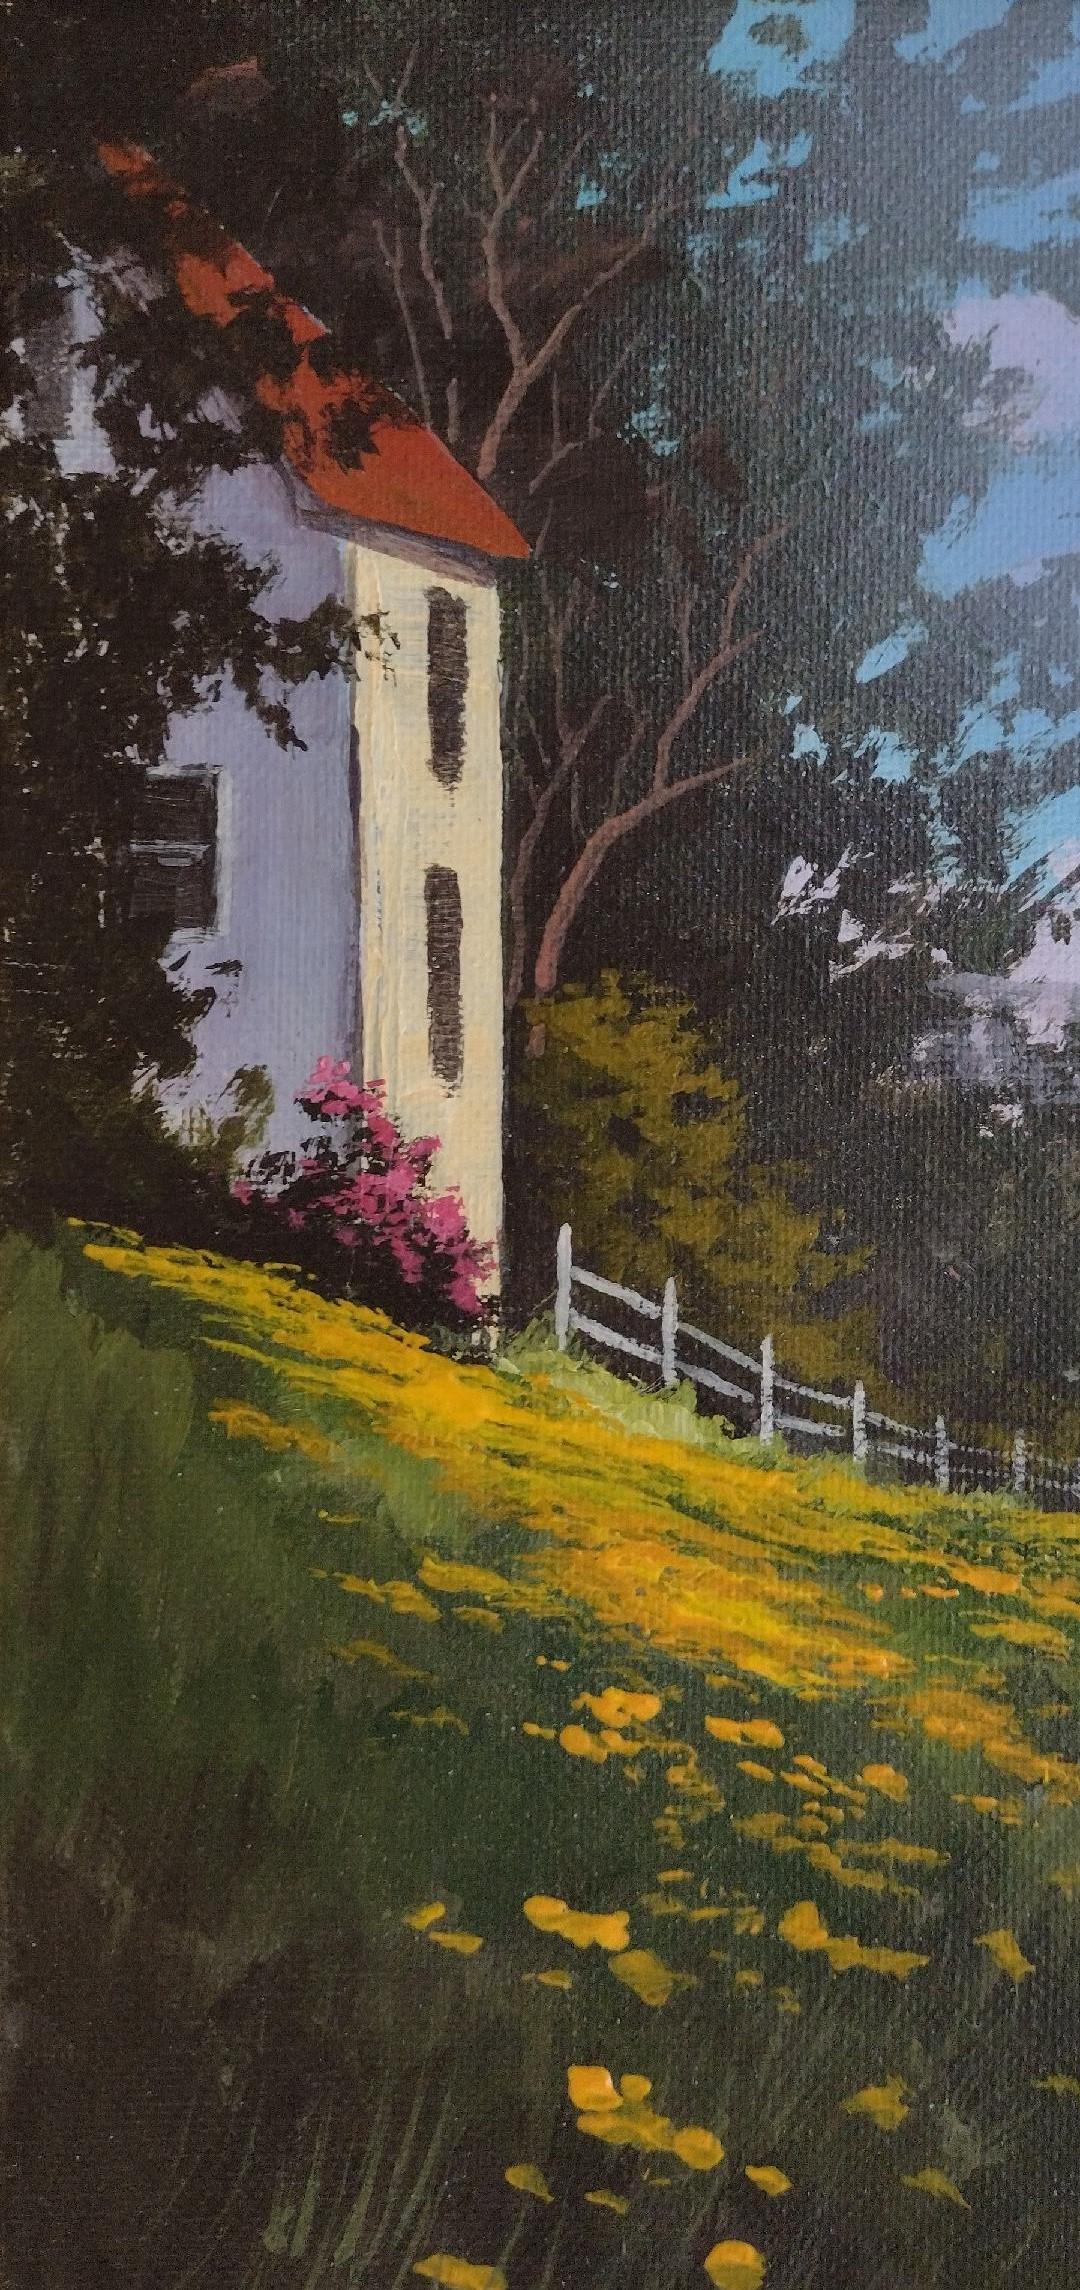 Front Path - Original acrylic on canvas landscape with house in the country - Black Landscape Painting by Douglas 